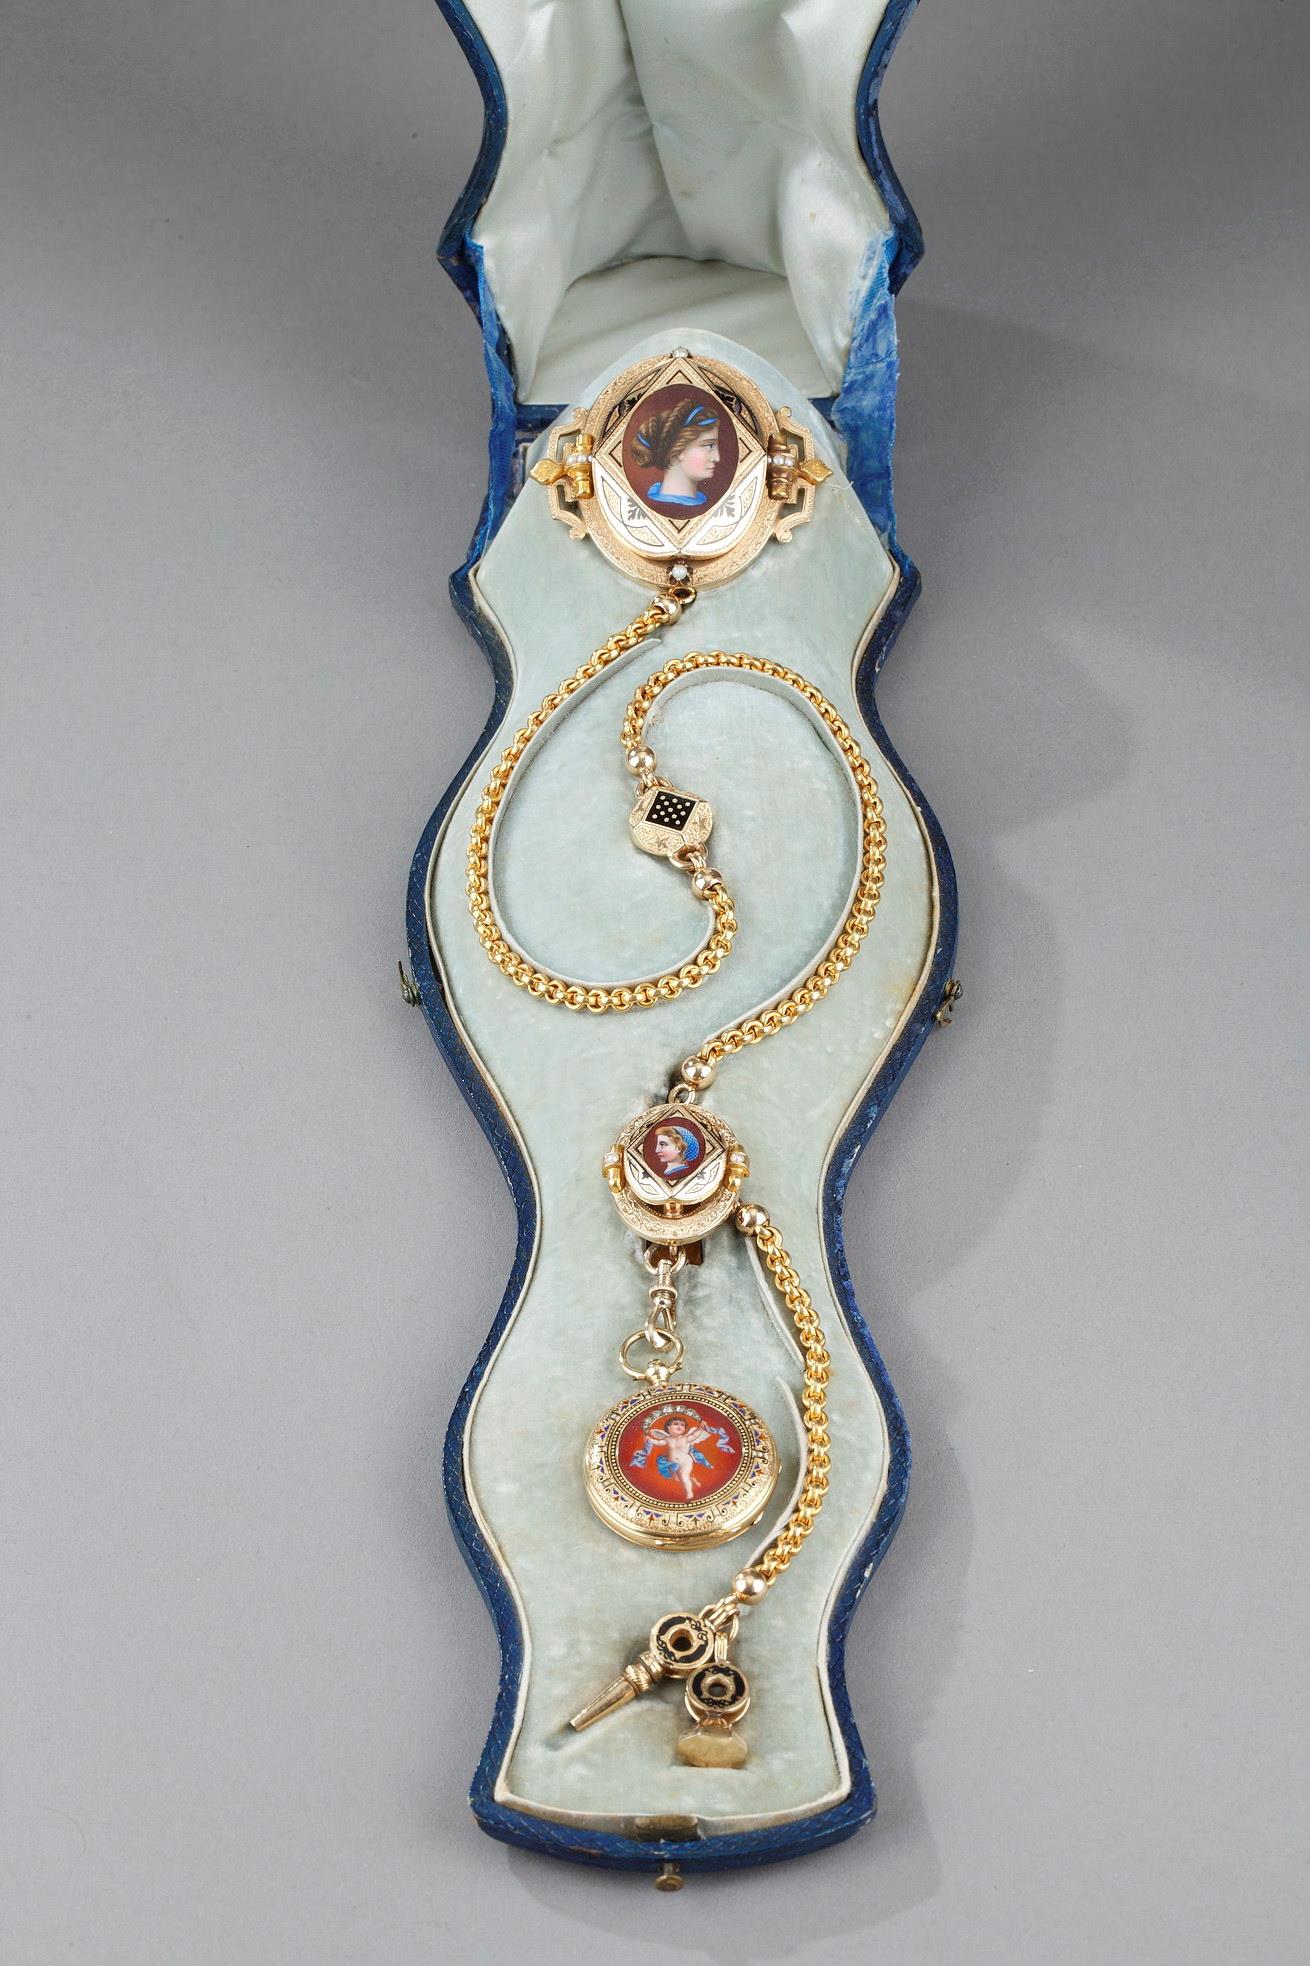 Mid-19th century Gold enamel chatelaine with Frères Junod' watch. Geneva.<br>Circa 1850